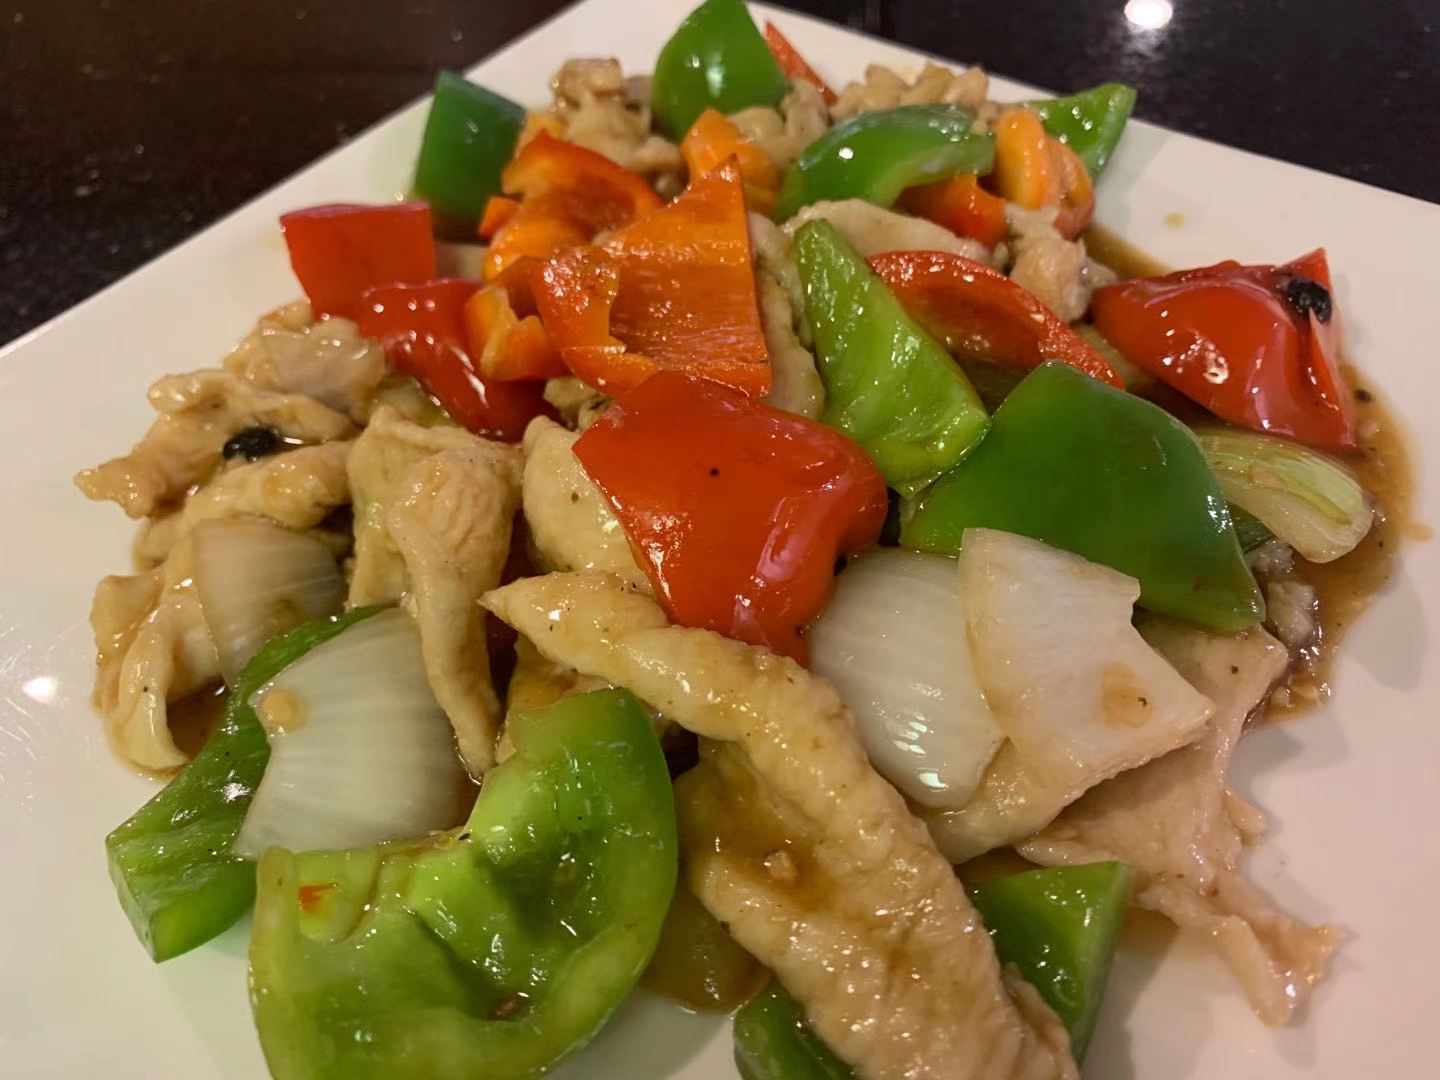 179. Chicken with Green Pepper and Black Bean Sauce